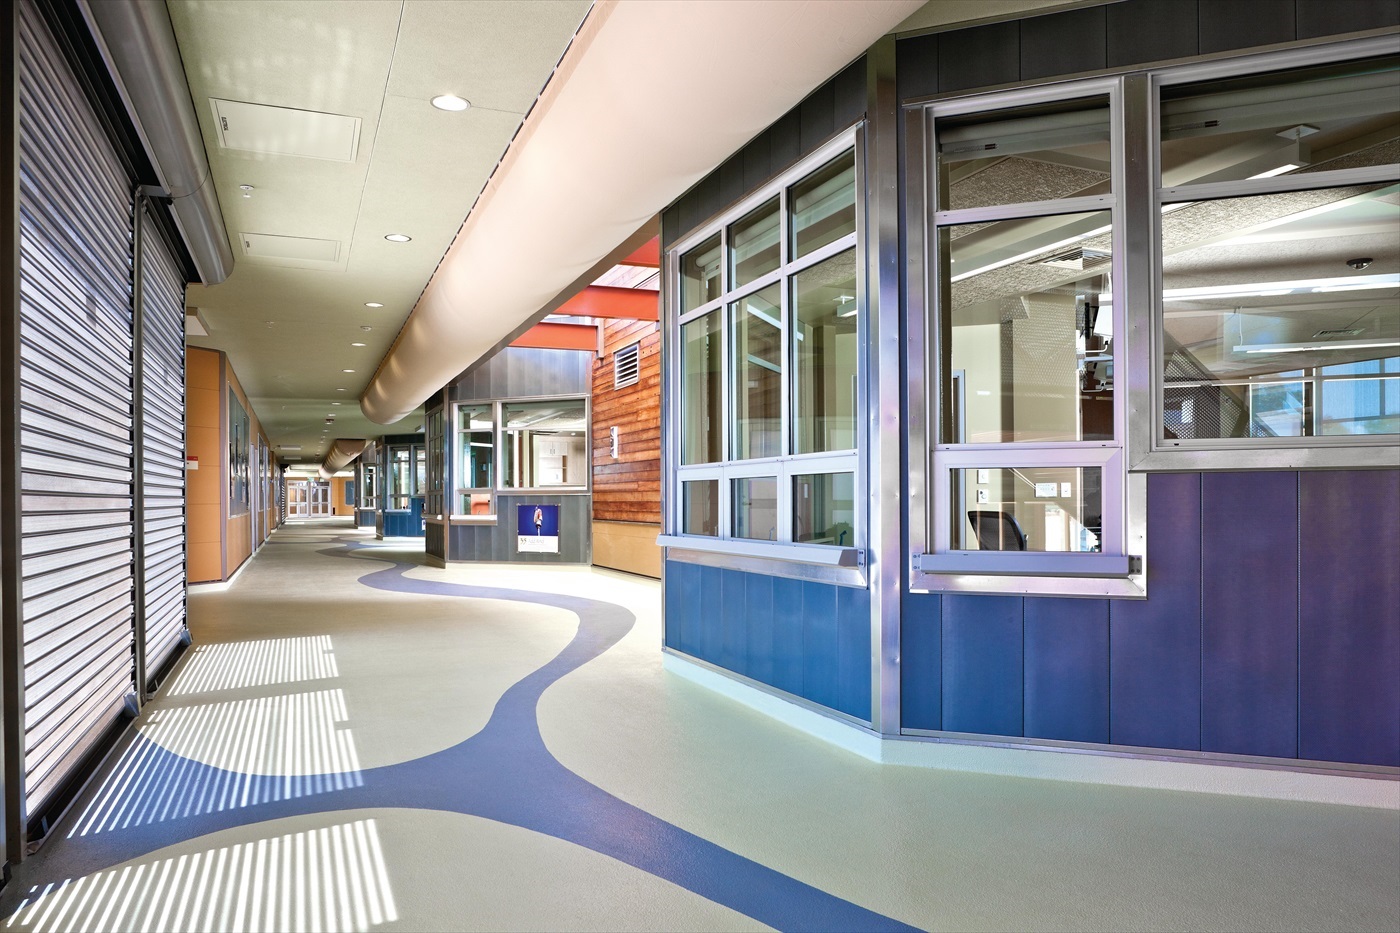 Colorful Ecore flooring in a medical facility